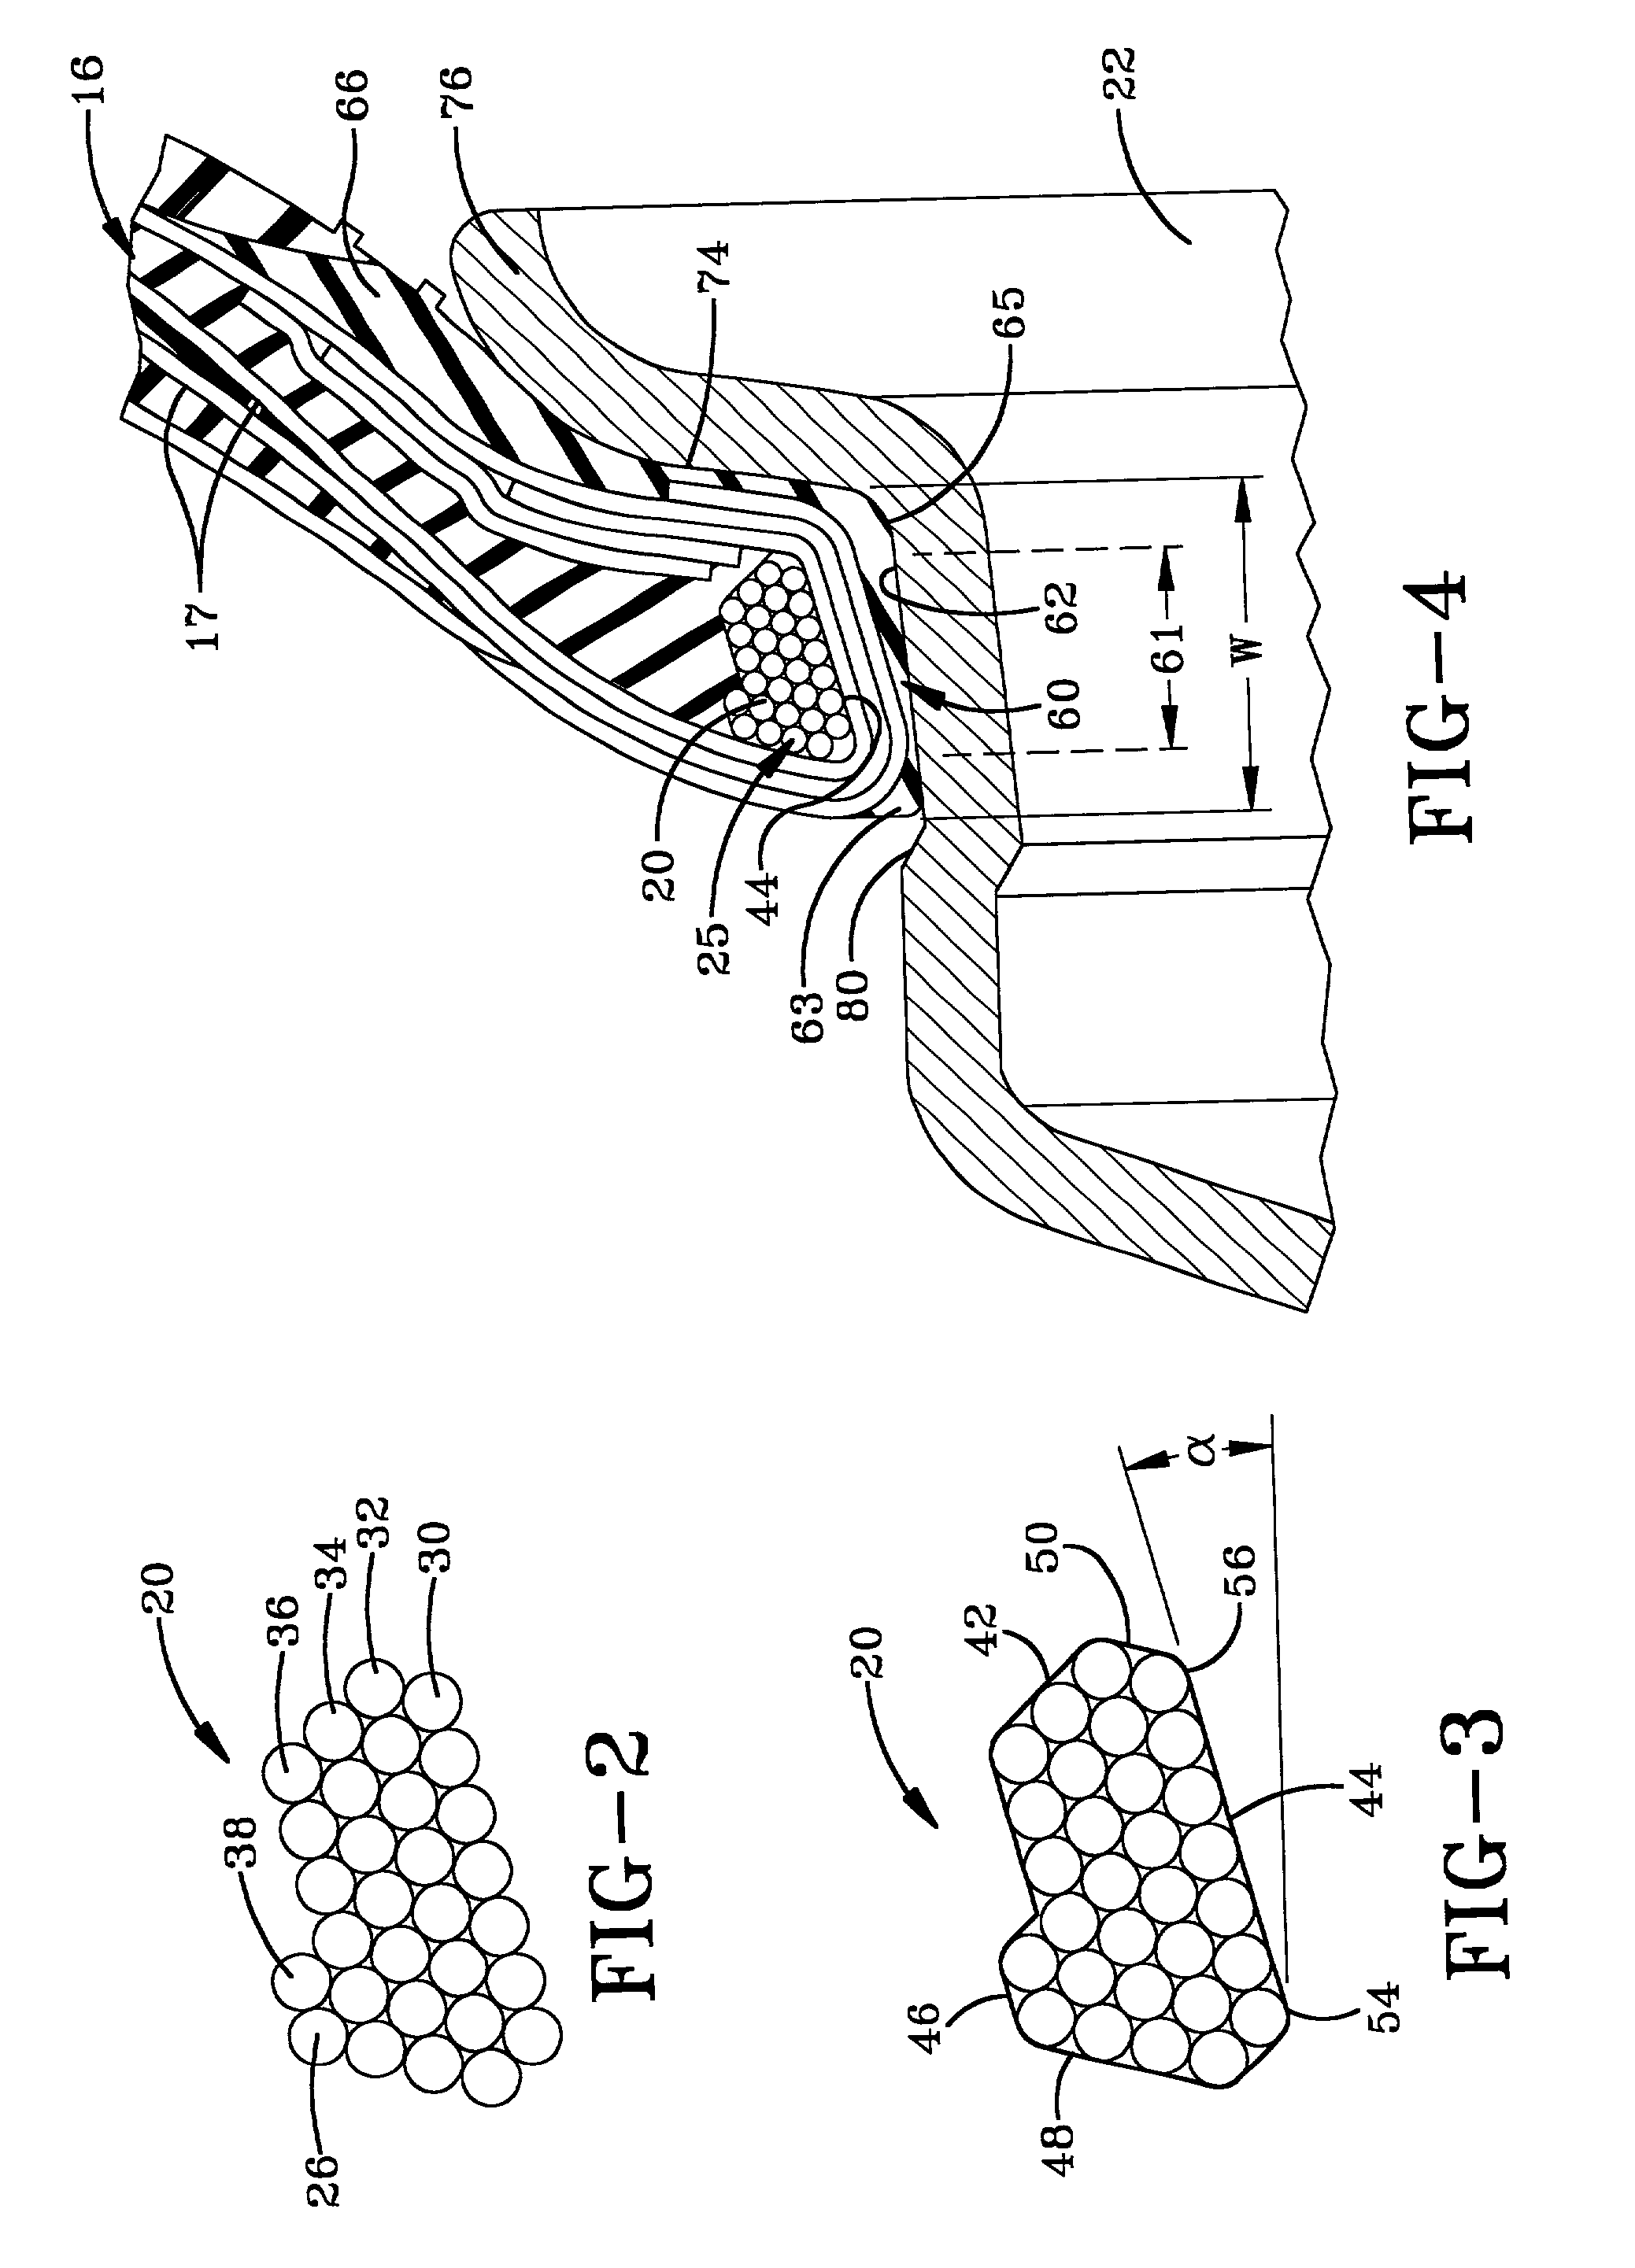 Pneumatic tire having specified bead structure